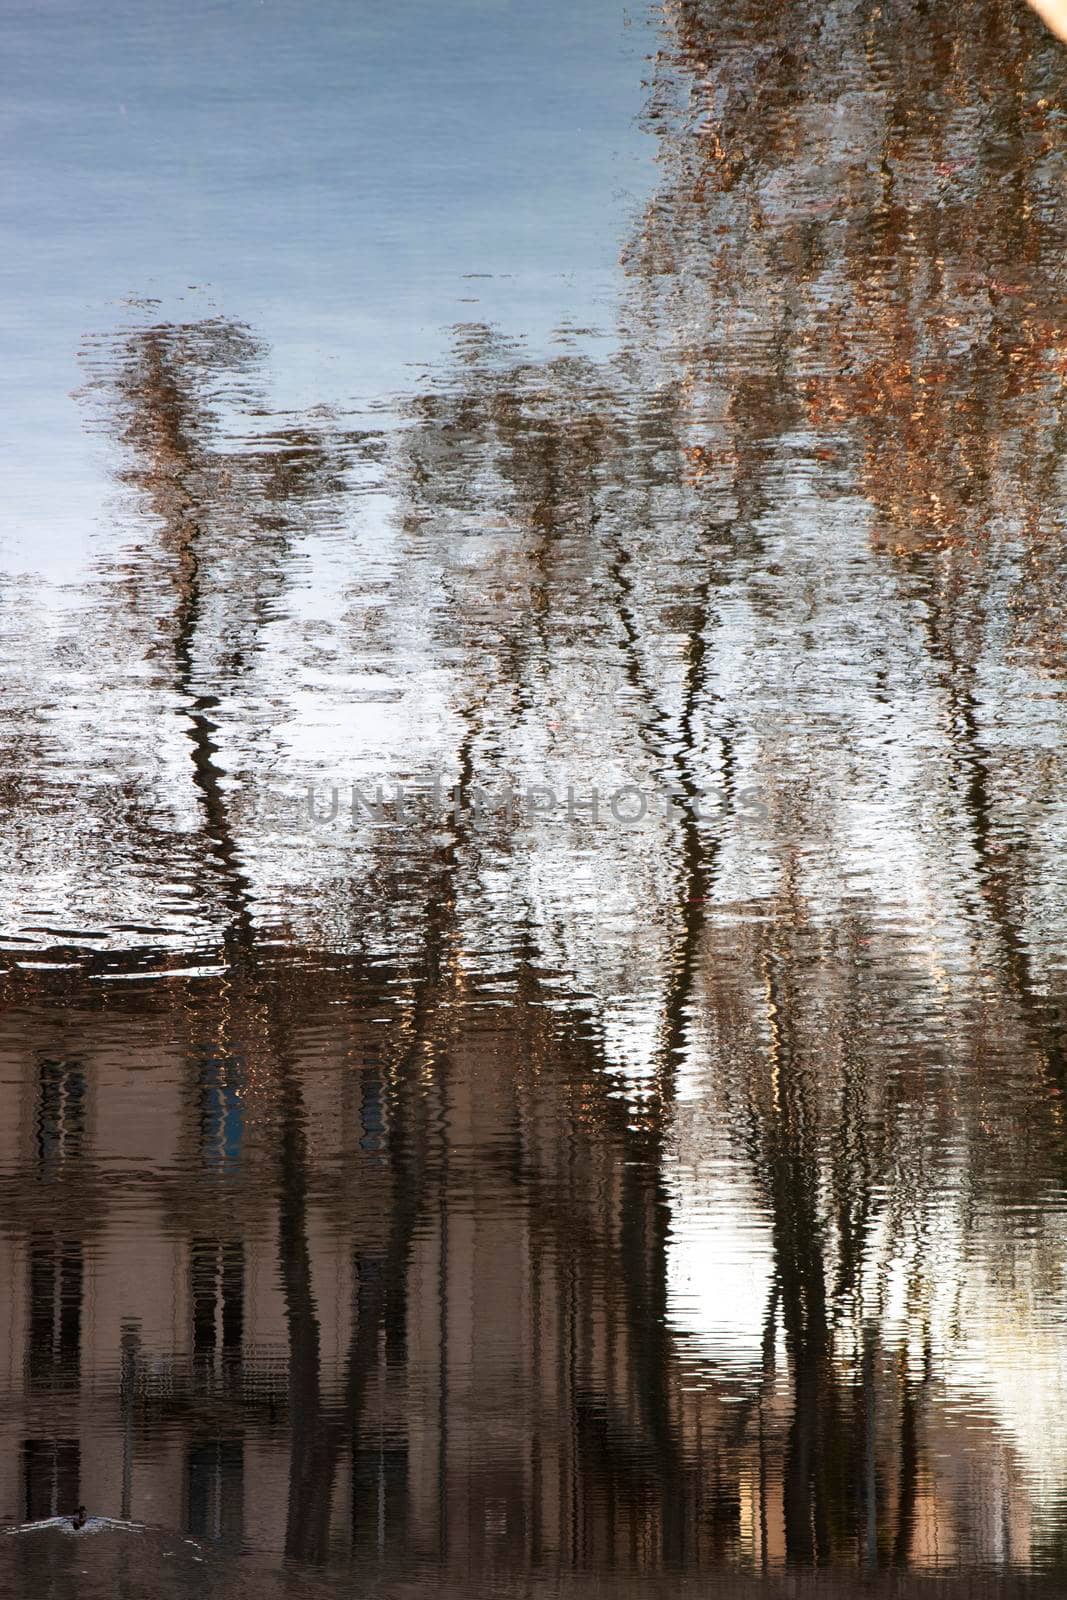 Fuzzy image of some trees and a building reflected on a river